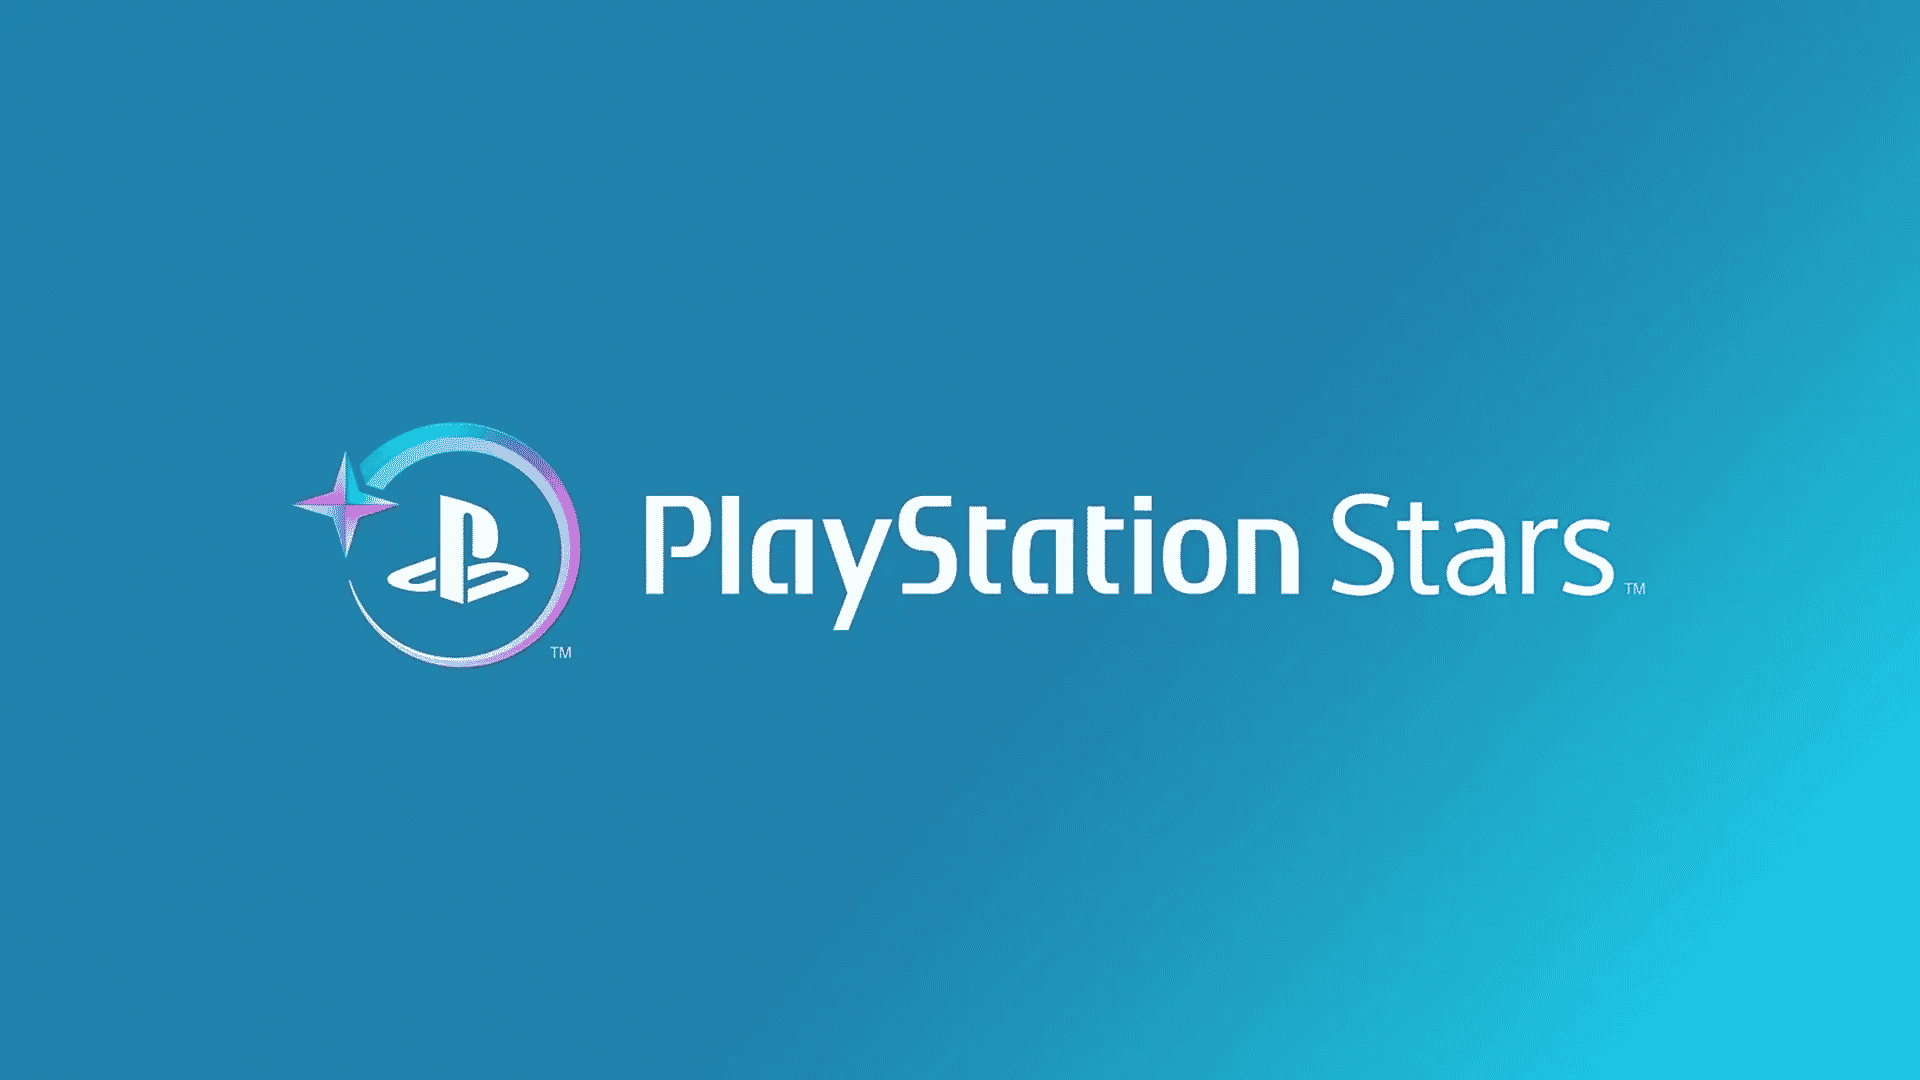 PlayStation Stars Will Receive NFT Digital Collectibles - Here's A First  Look